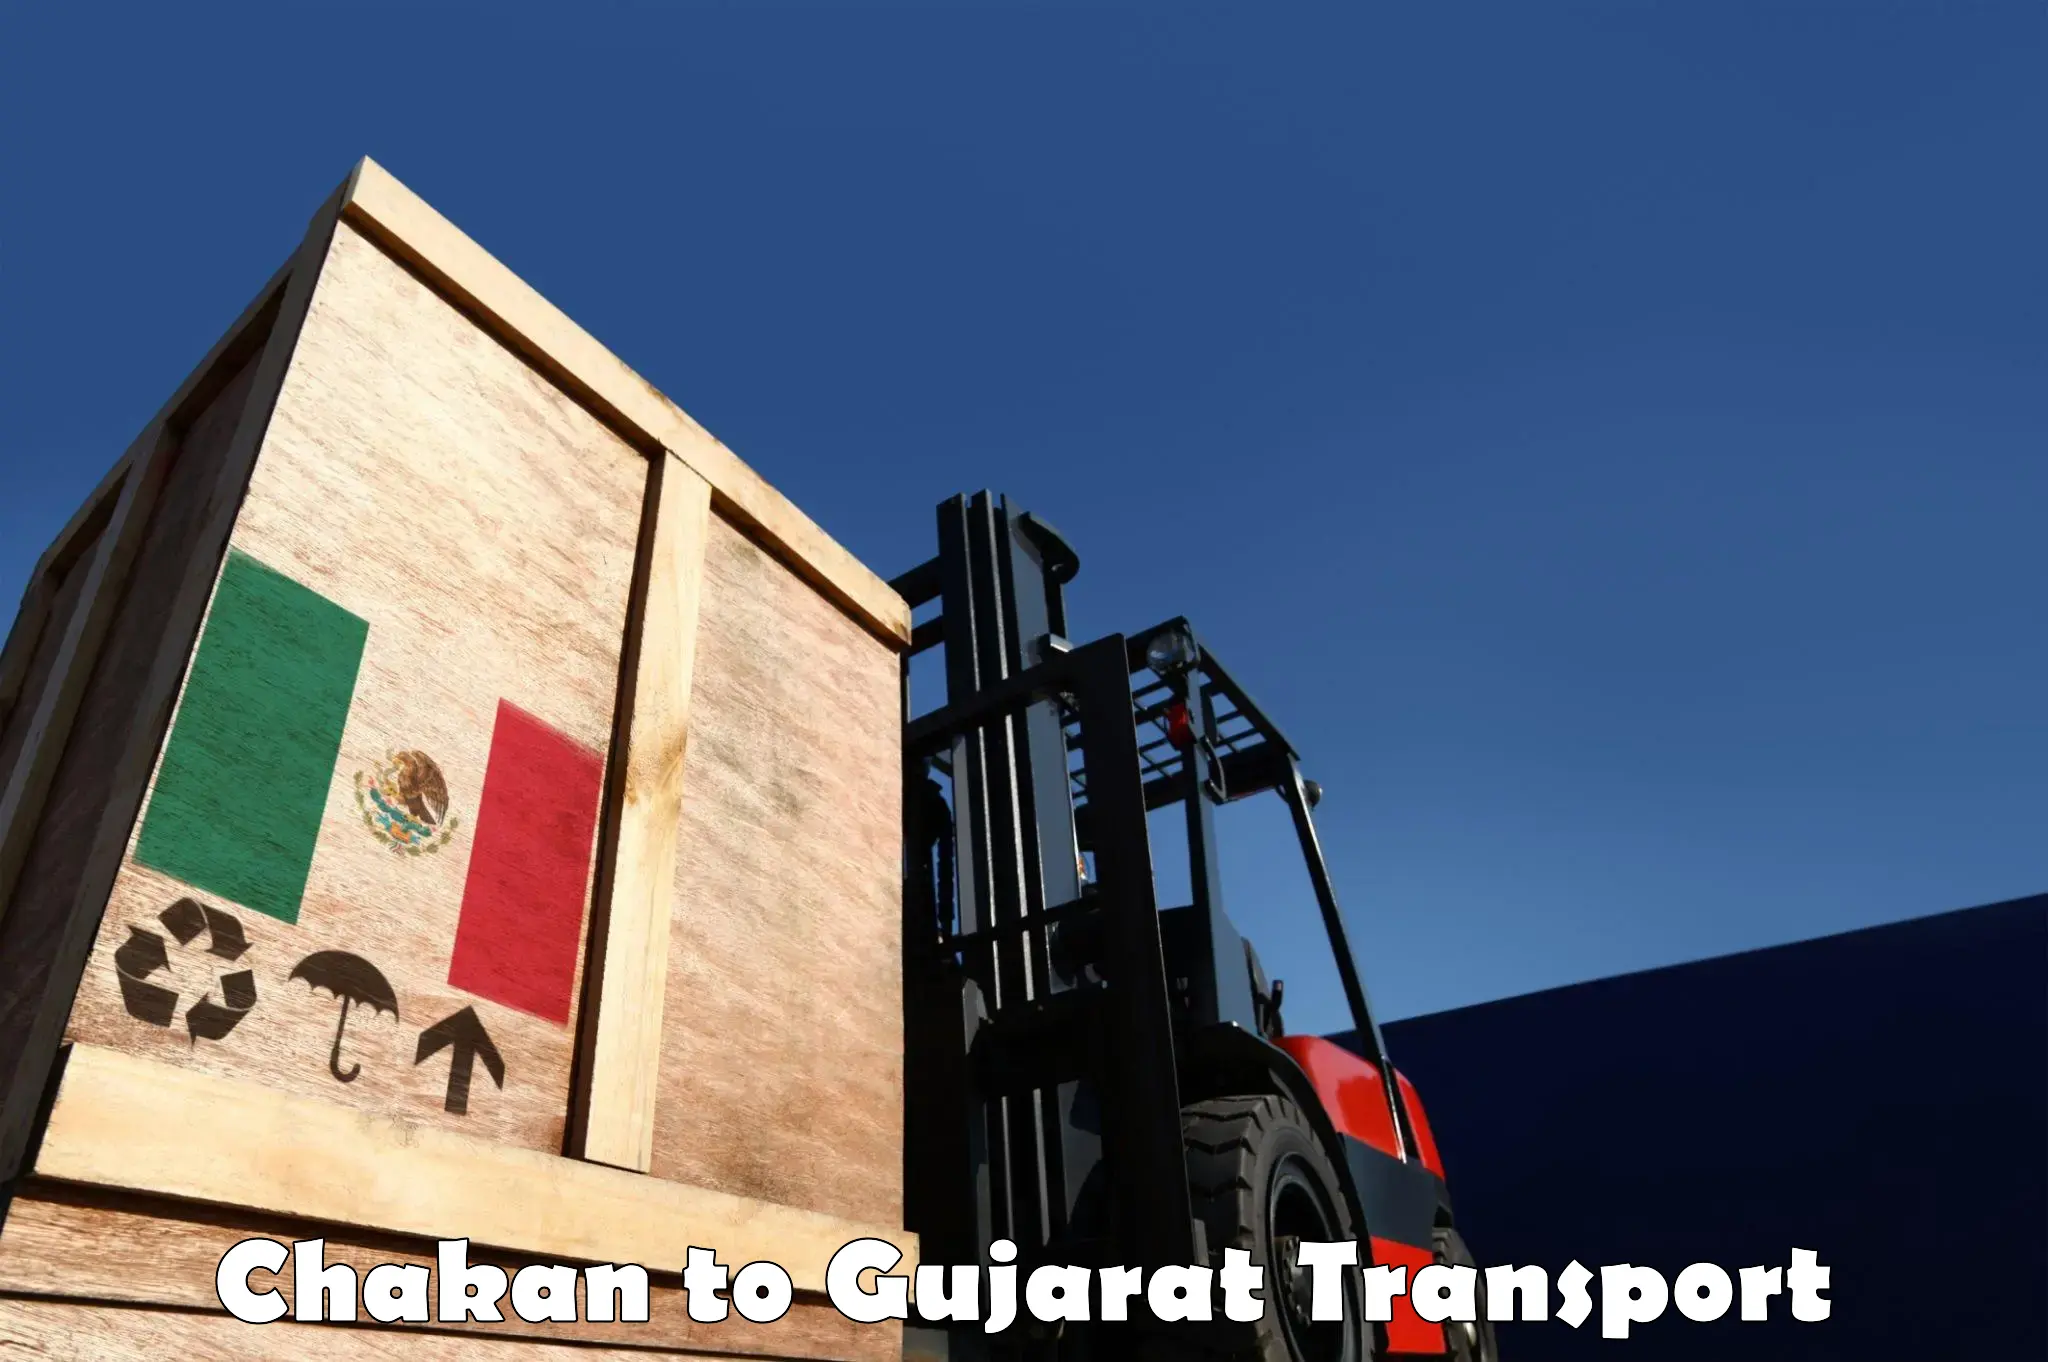 Goods transport services in Chakan to GIDC